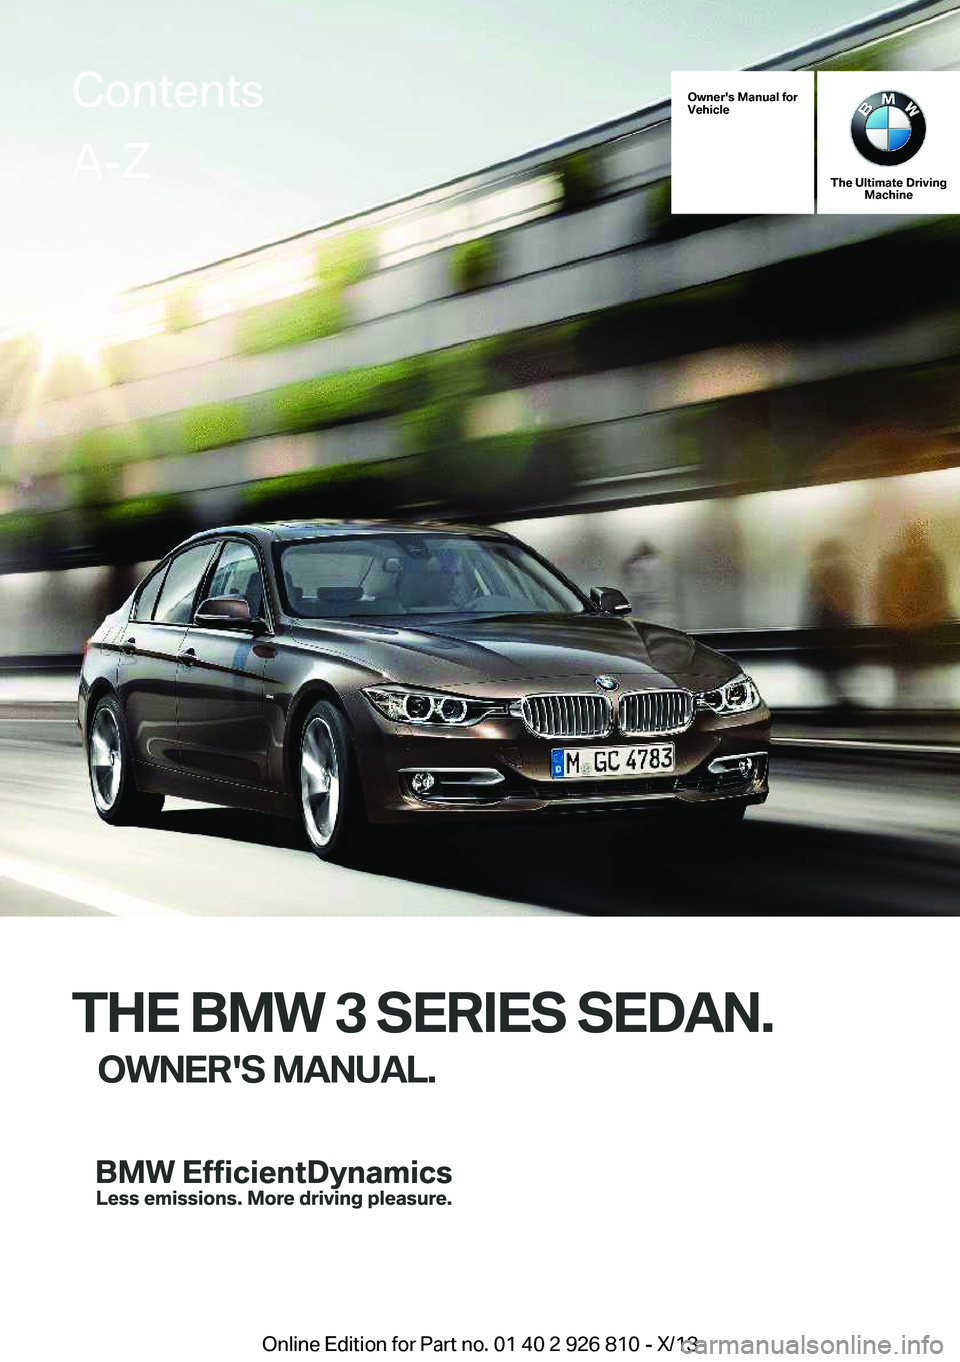 BMW 328I XDRIVE SEDAN 2013  Owners Manual Owner's Manual for
Vehicle
The Ultimate Driving Machine
THE BMW 3 SERIES SEDAN.
OWNER'S MANUAL.
ContentsA-Z
Online Edition for Part no. 01 40 2 926 810 - X/13   